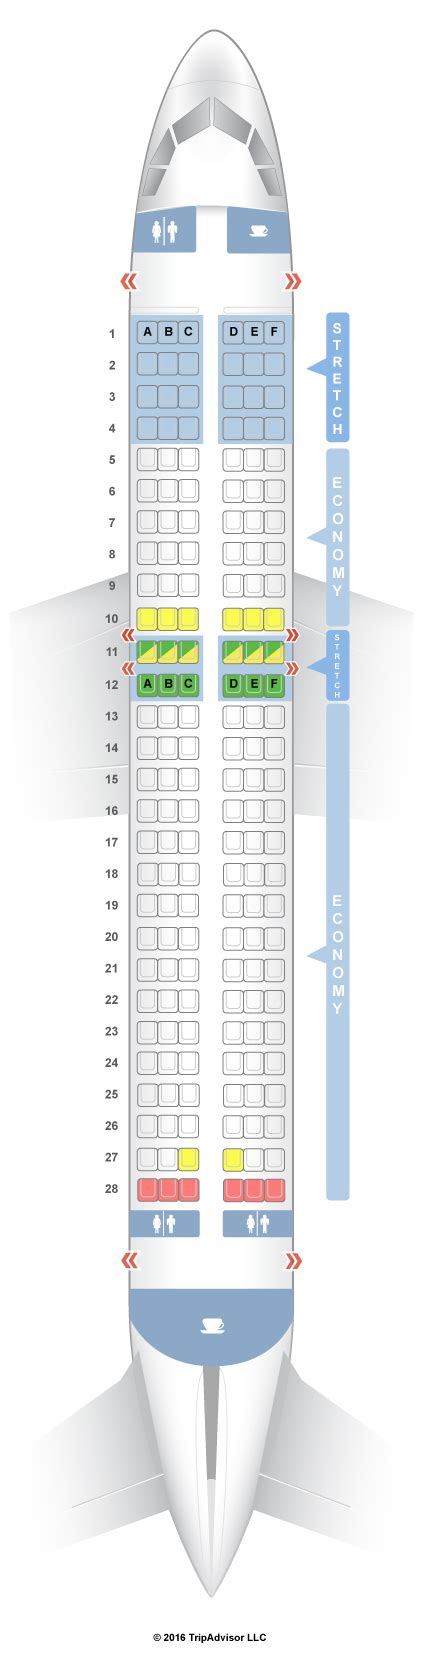 Airbus A320. A detailed seat map showing the best airline seats on th